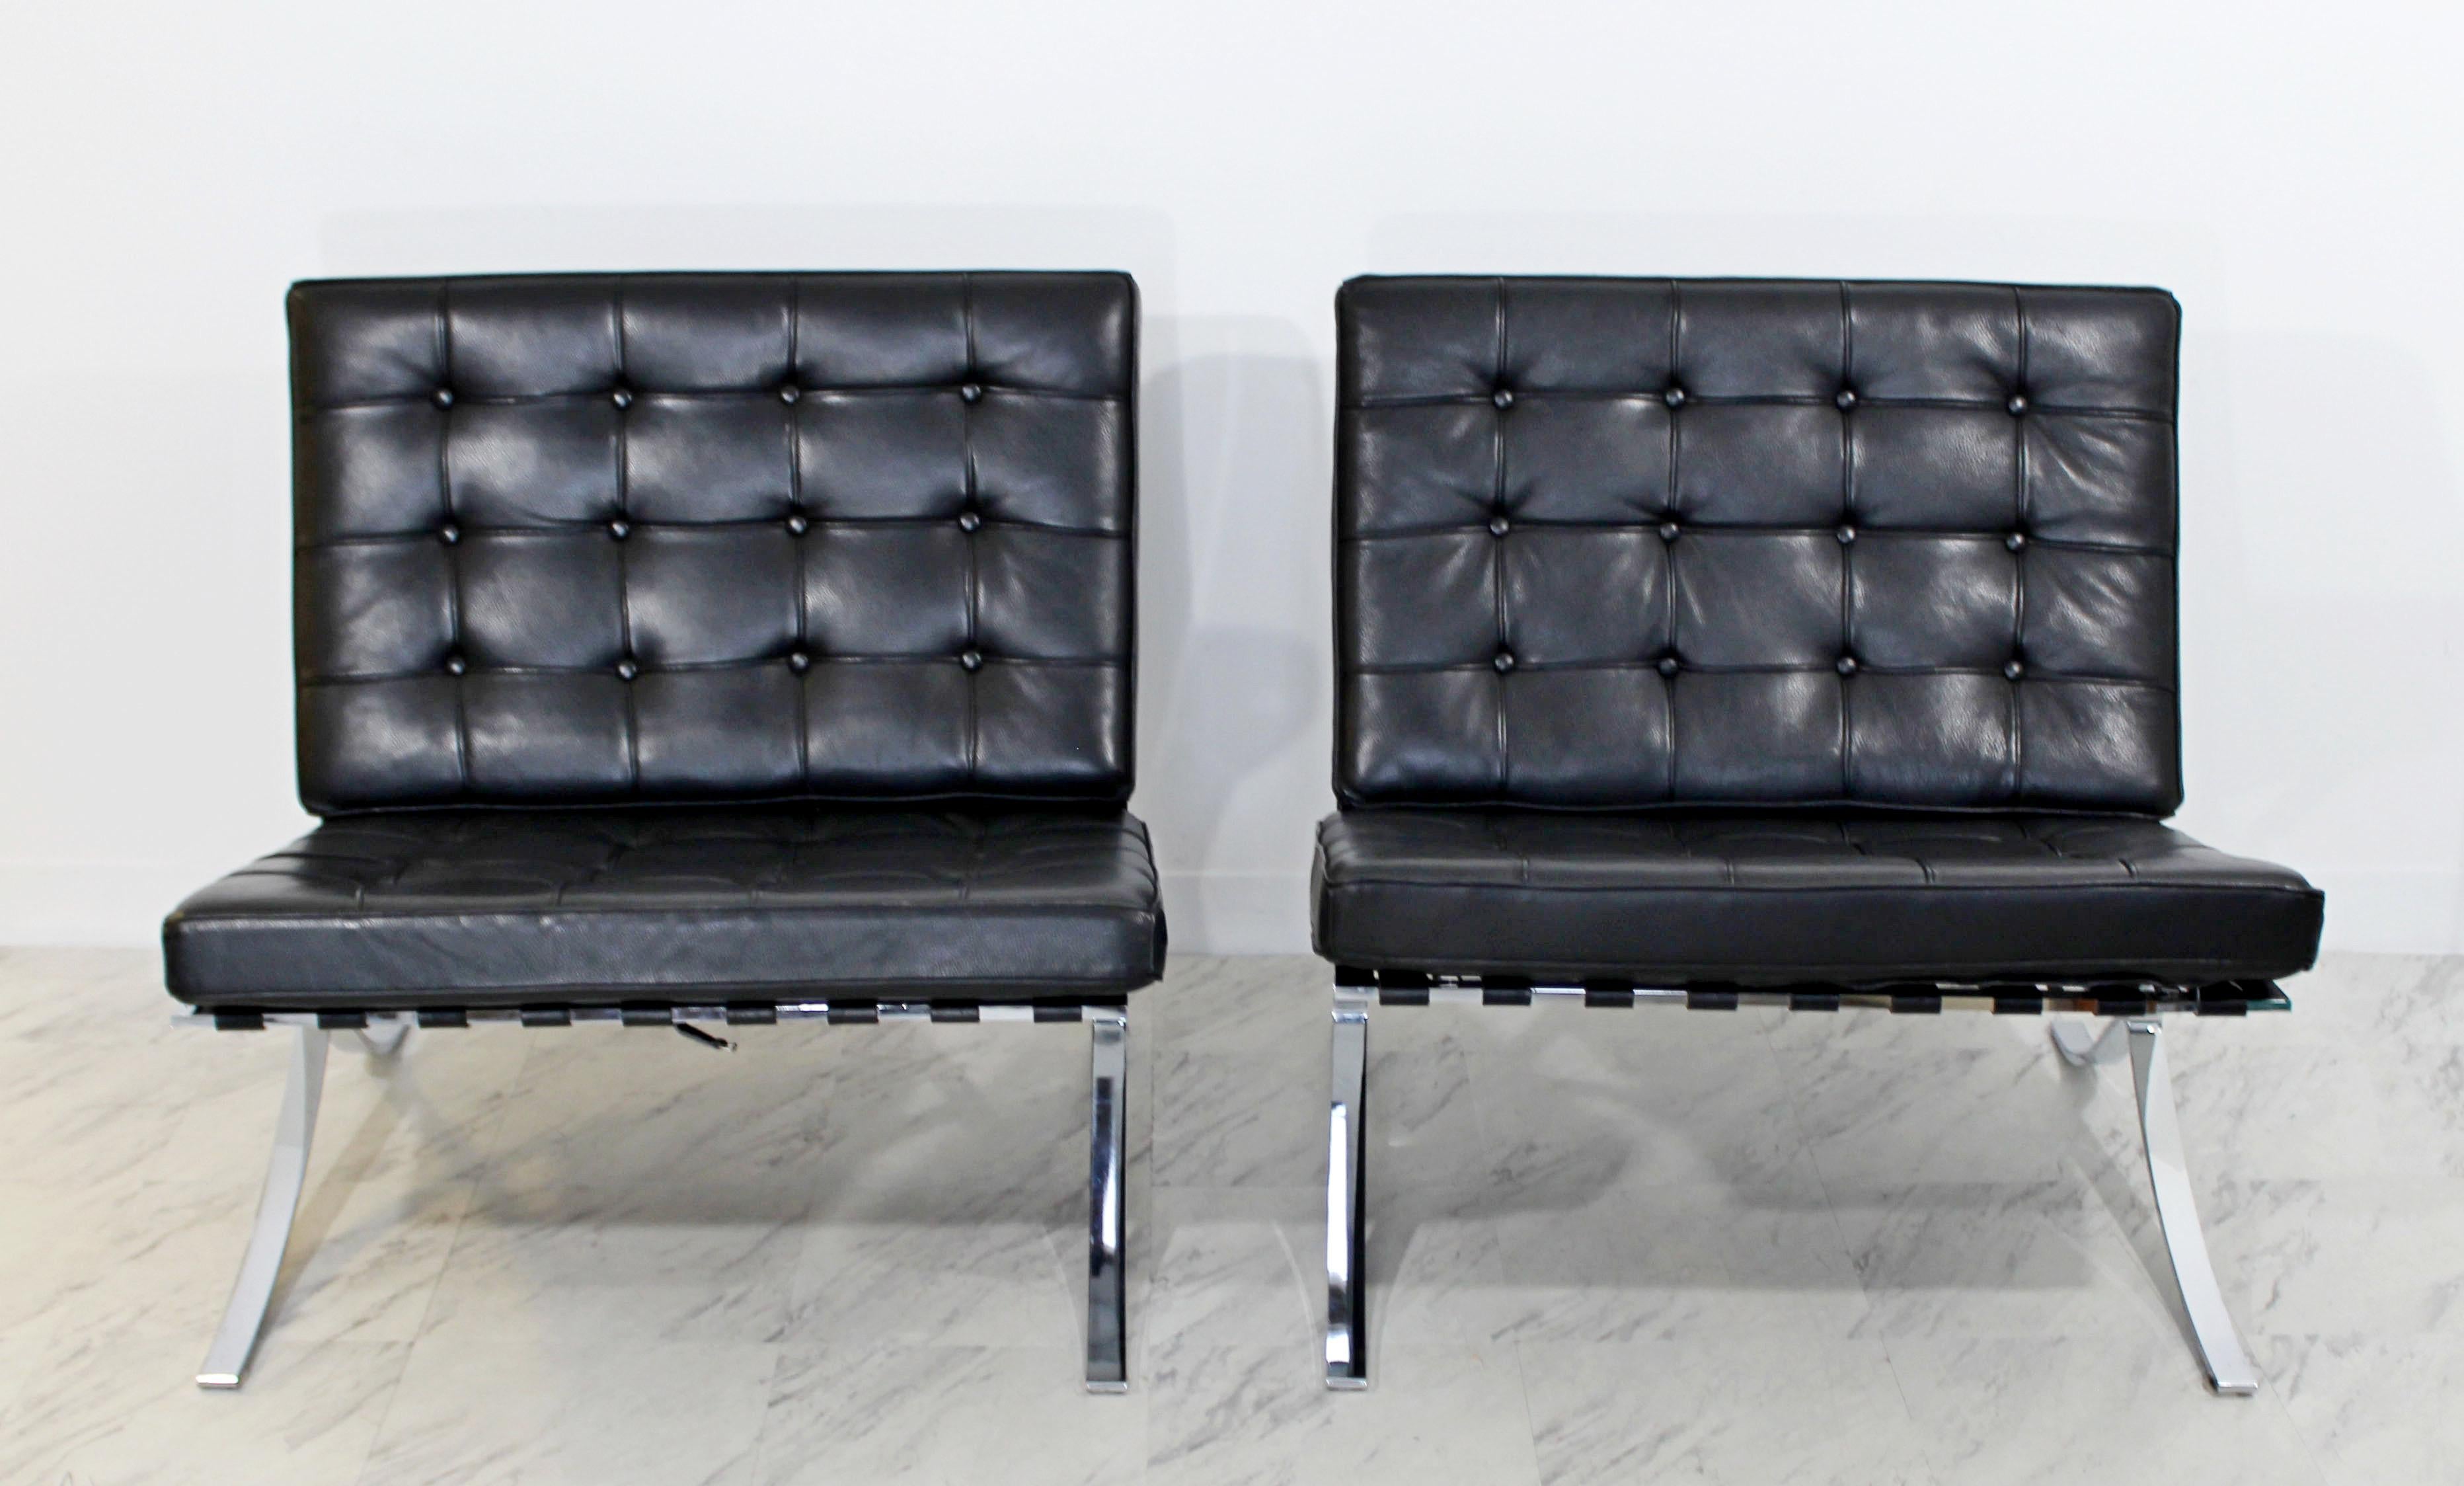 For your consideration is a wonderful set of four, chrome and tufted black leather, Barcelona style side chairs, made in Italy, circa the 1970s. In excellent condition. The dimensions are 30